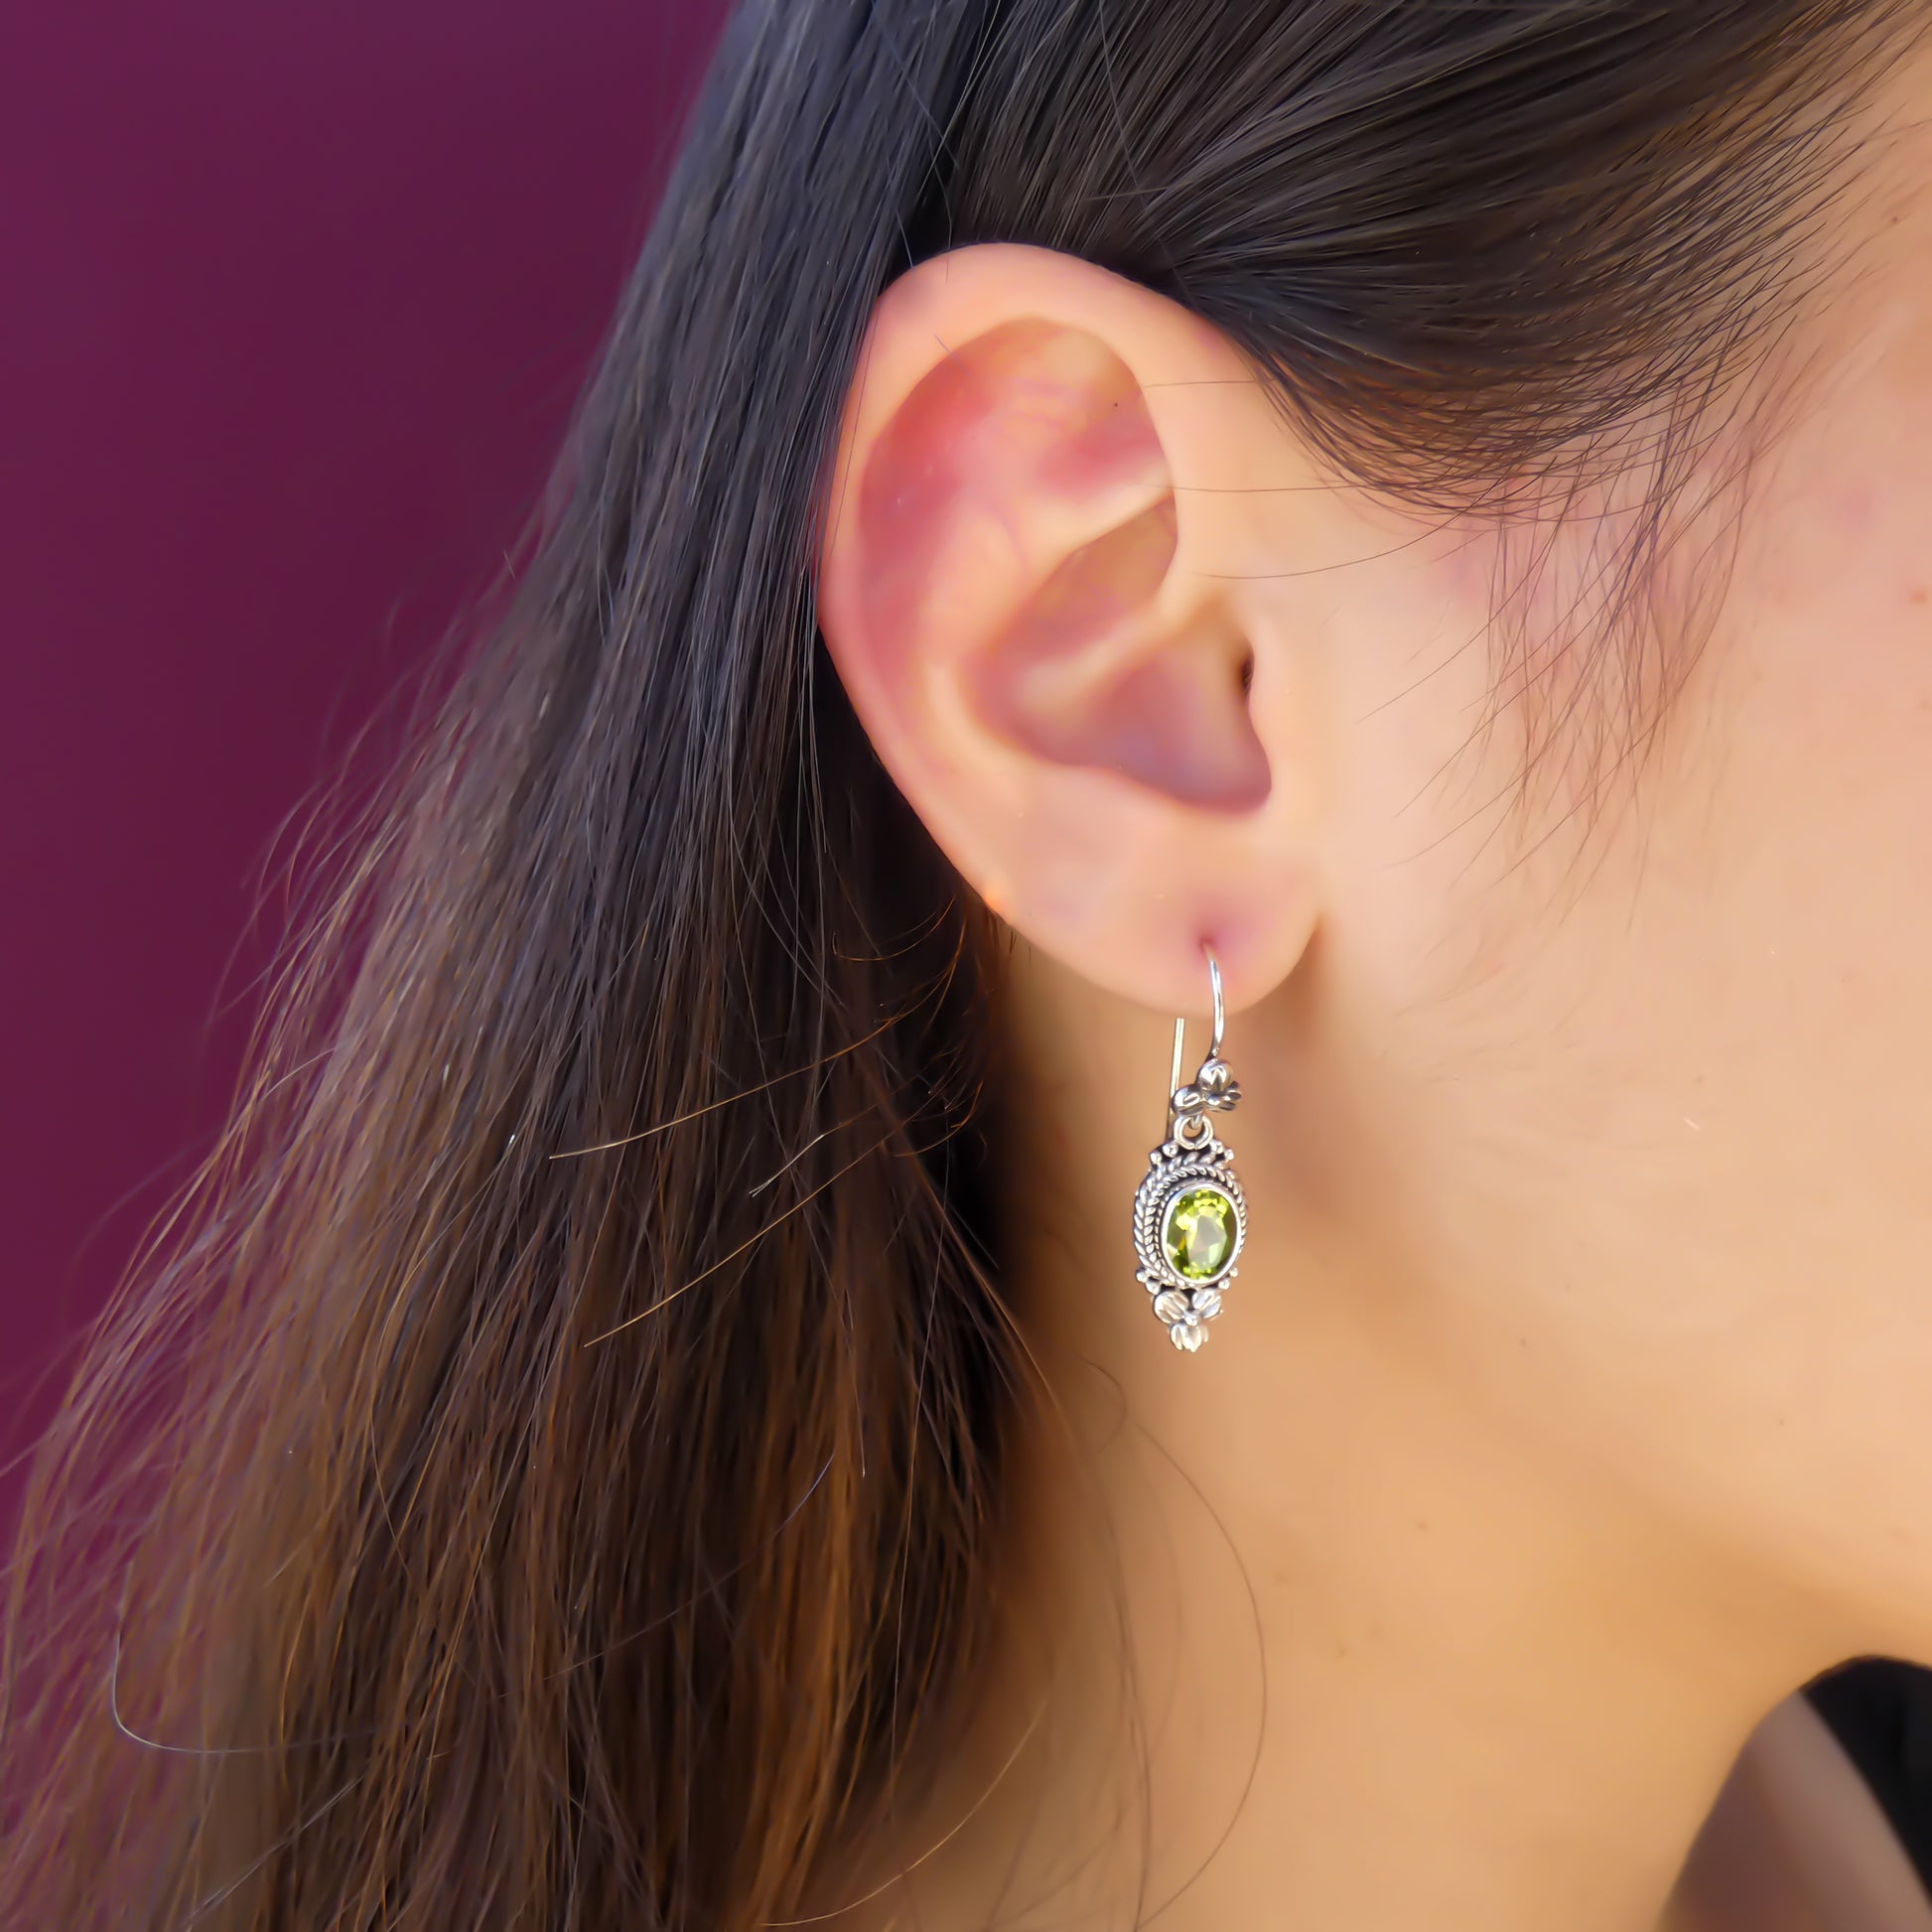 Woman wearing silver wire earrings with floral design and peridot stones.